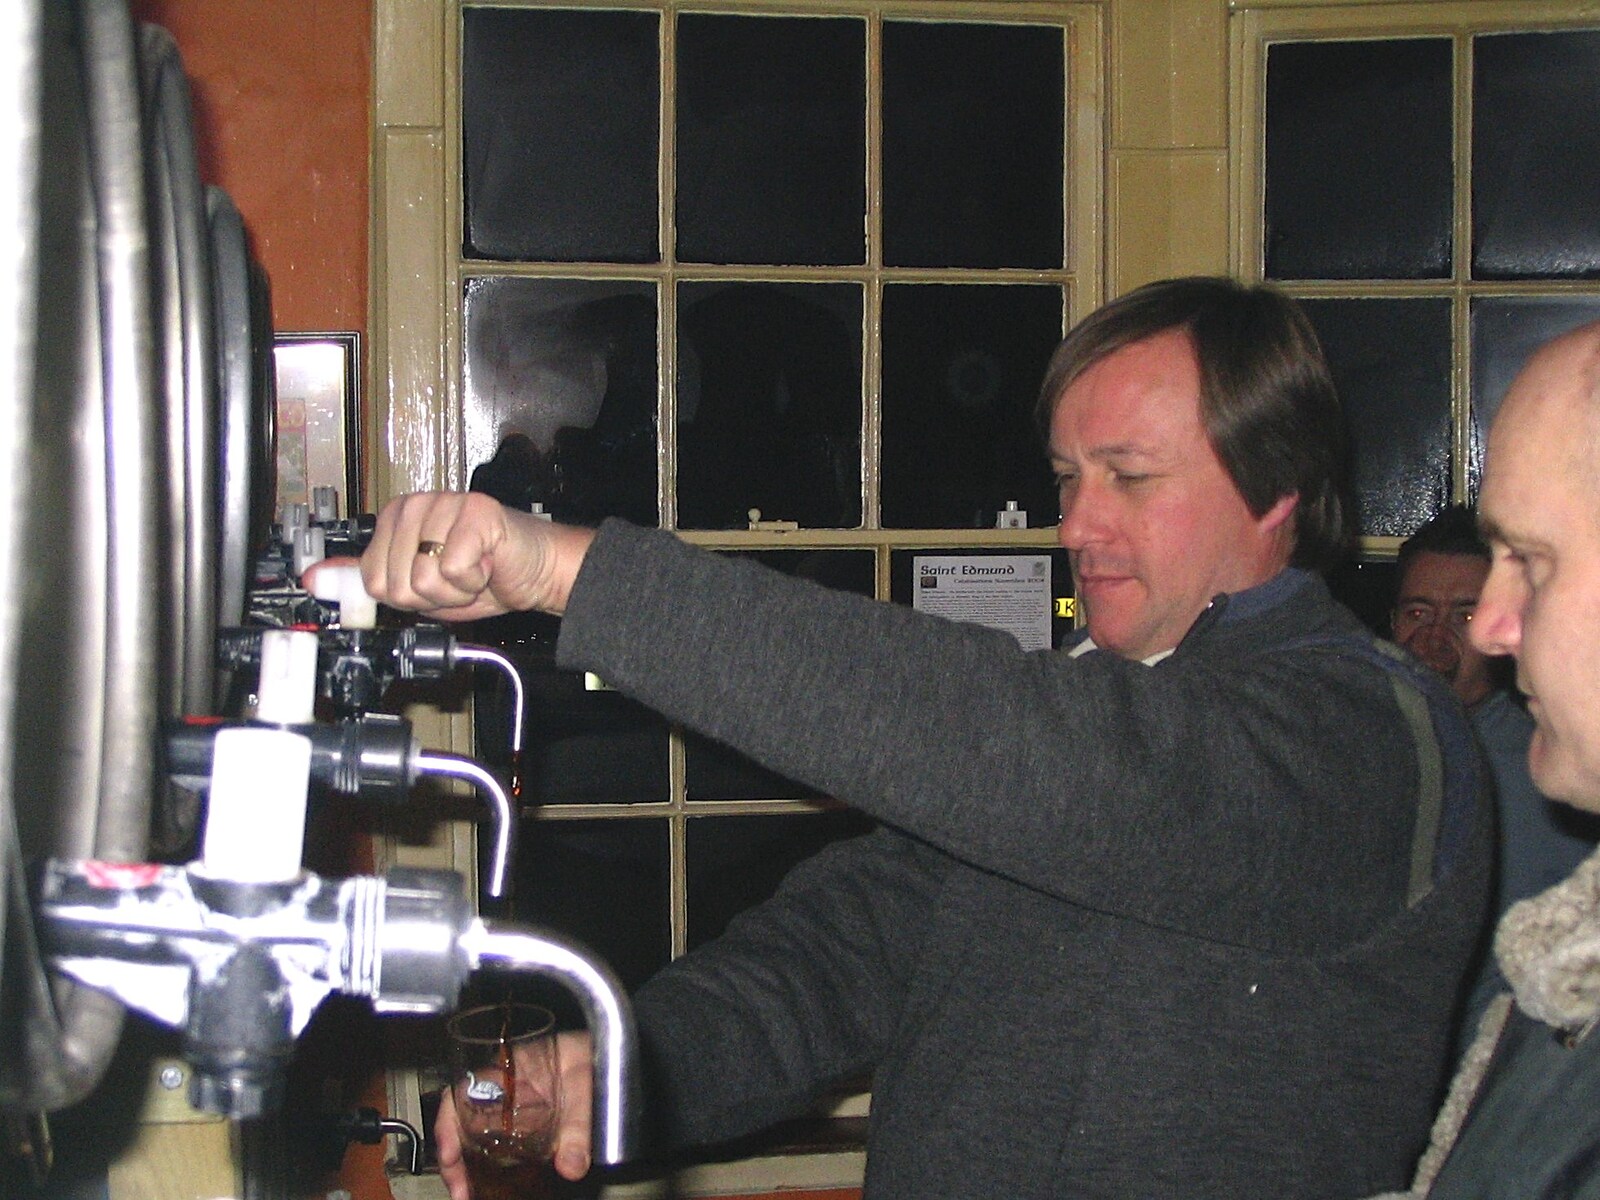 The landlord pours a pint from the barrel from The Hoxne Swan Beer Festival, Hoxne, Suffolk - 20th November 2004